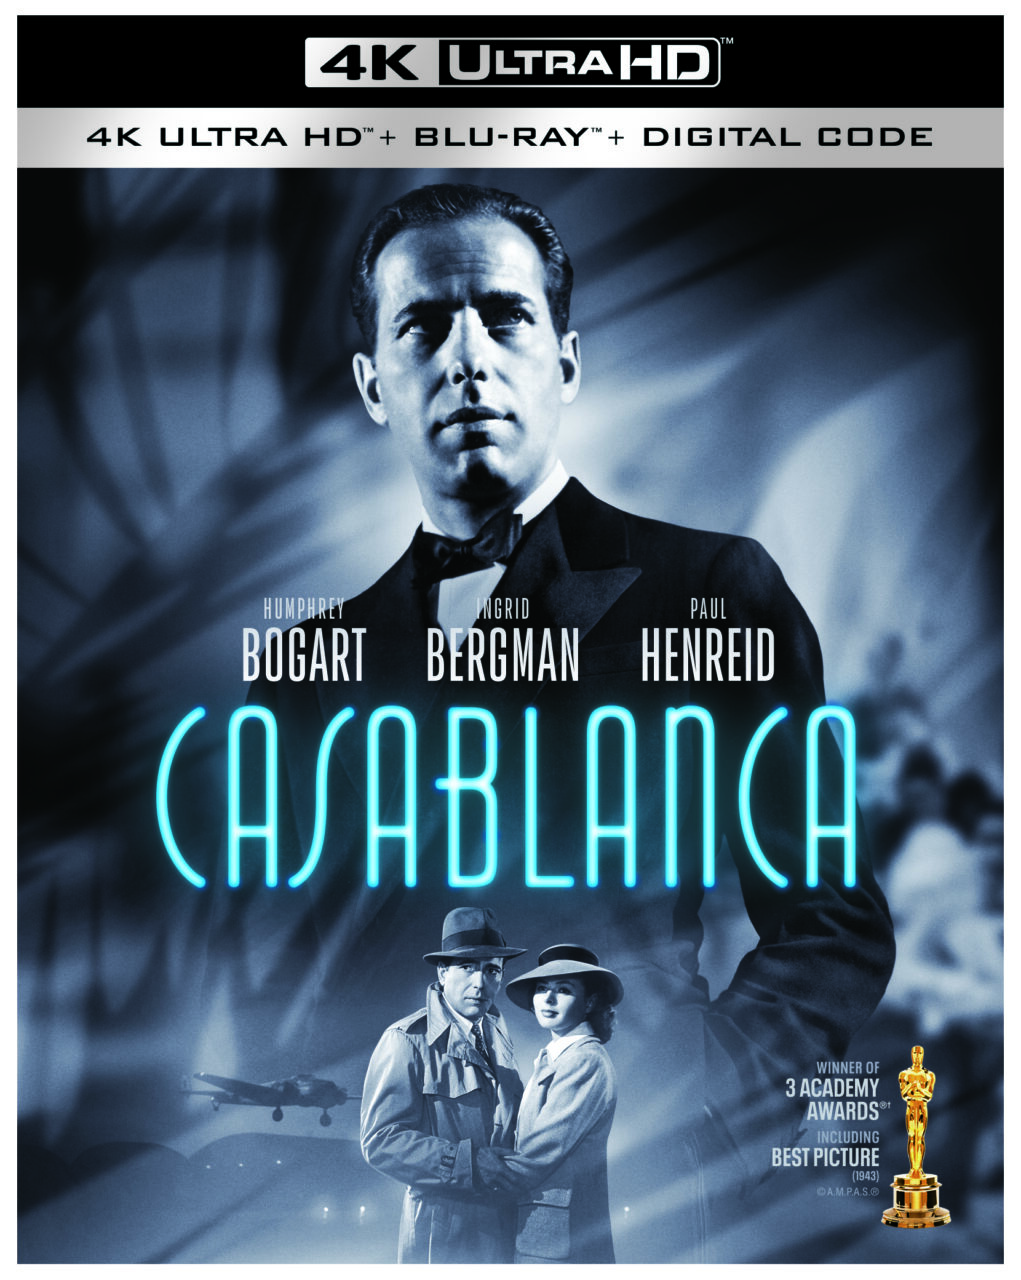 Casablanca 4K Ultra HD Combo Pack cover (Warner Bros. Home Entertainment)